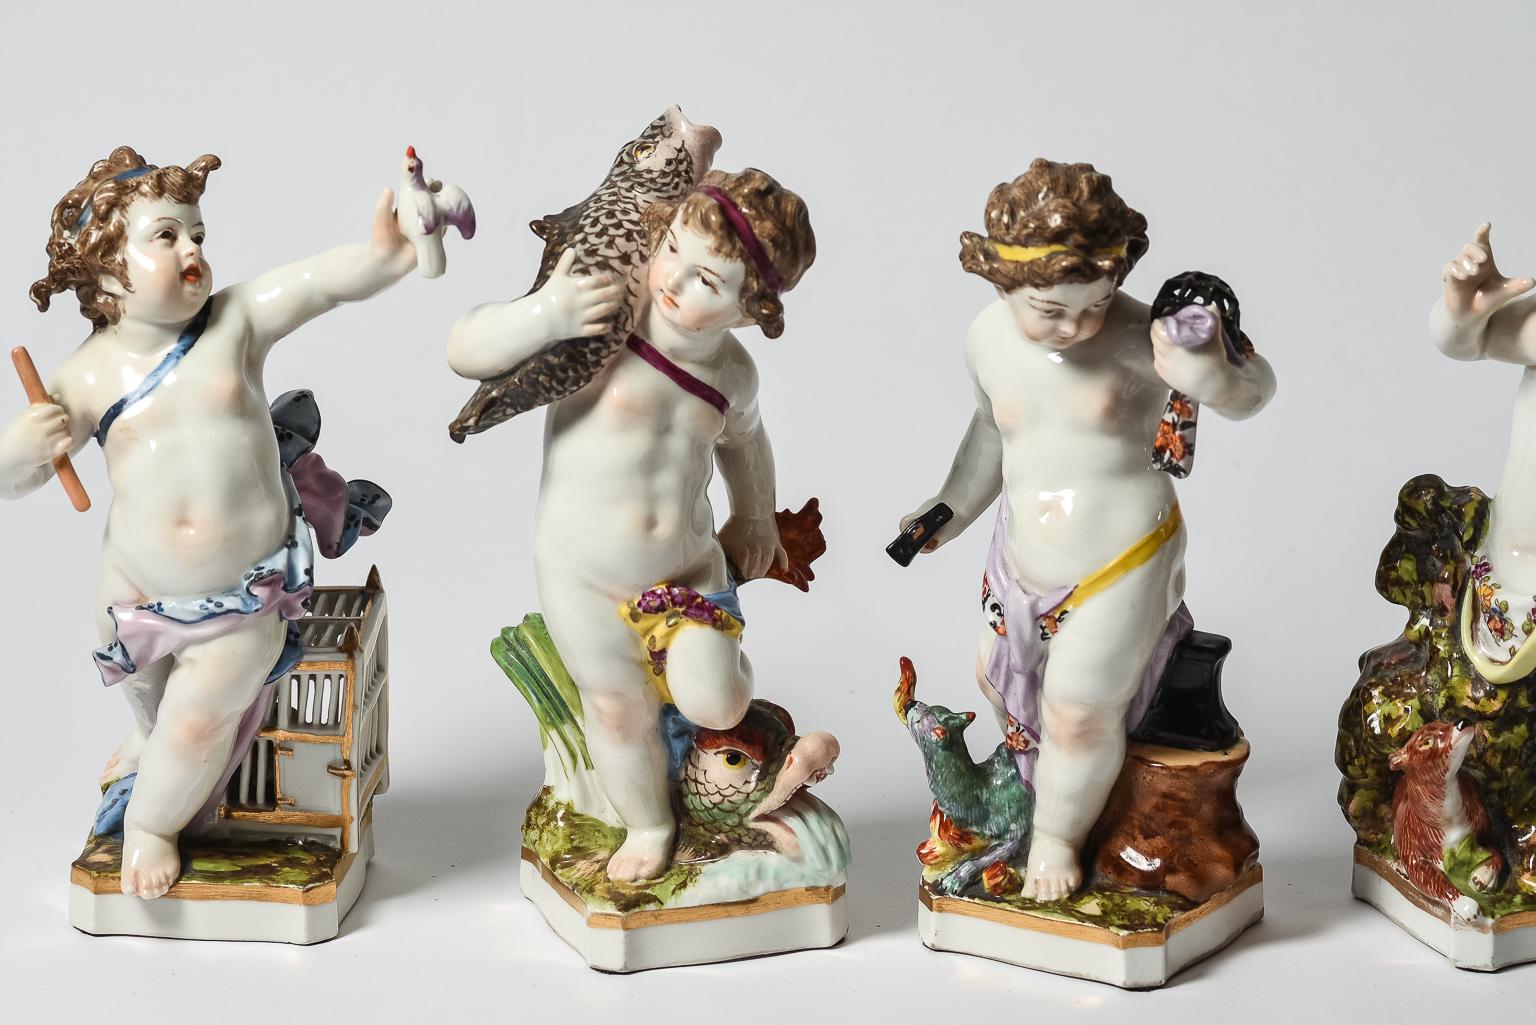 A delightful set of 4 fine porcelain sculptures created by the world re known firm of KPM, or The Royal Porcelain Factory of Berlin. Each piece has been very finely hand molded and sculpted and then meticulously and realistically hand painted. The